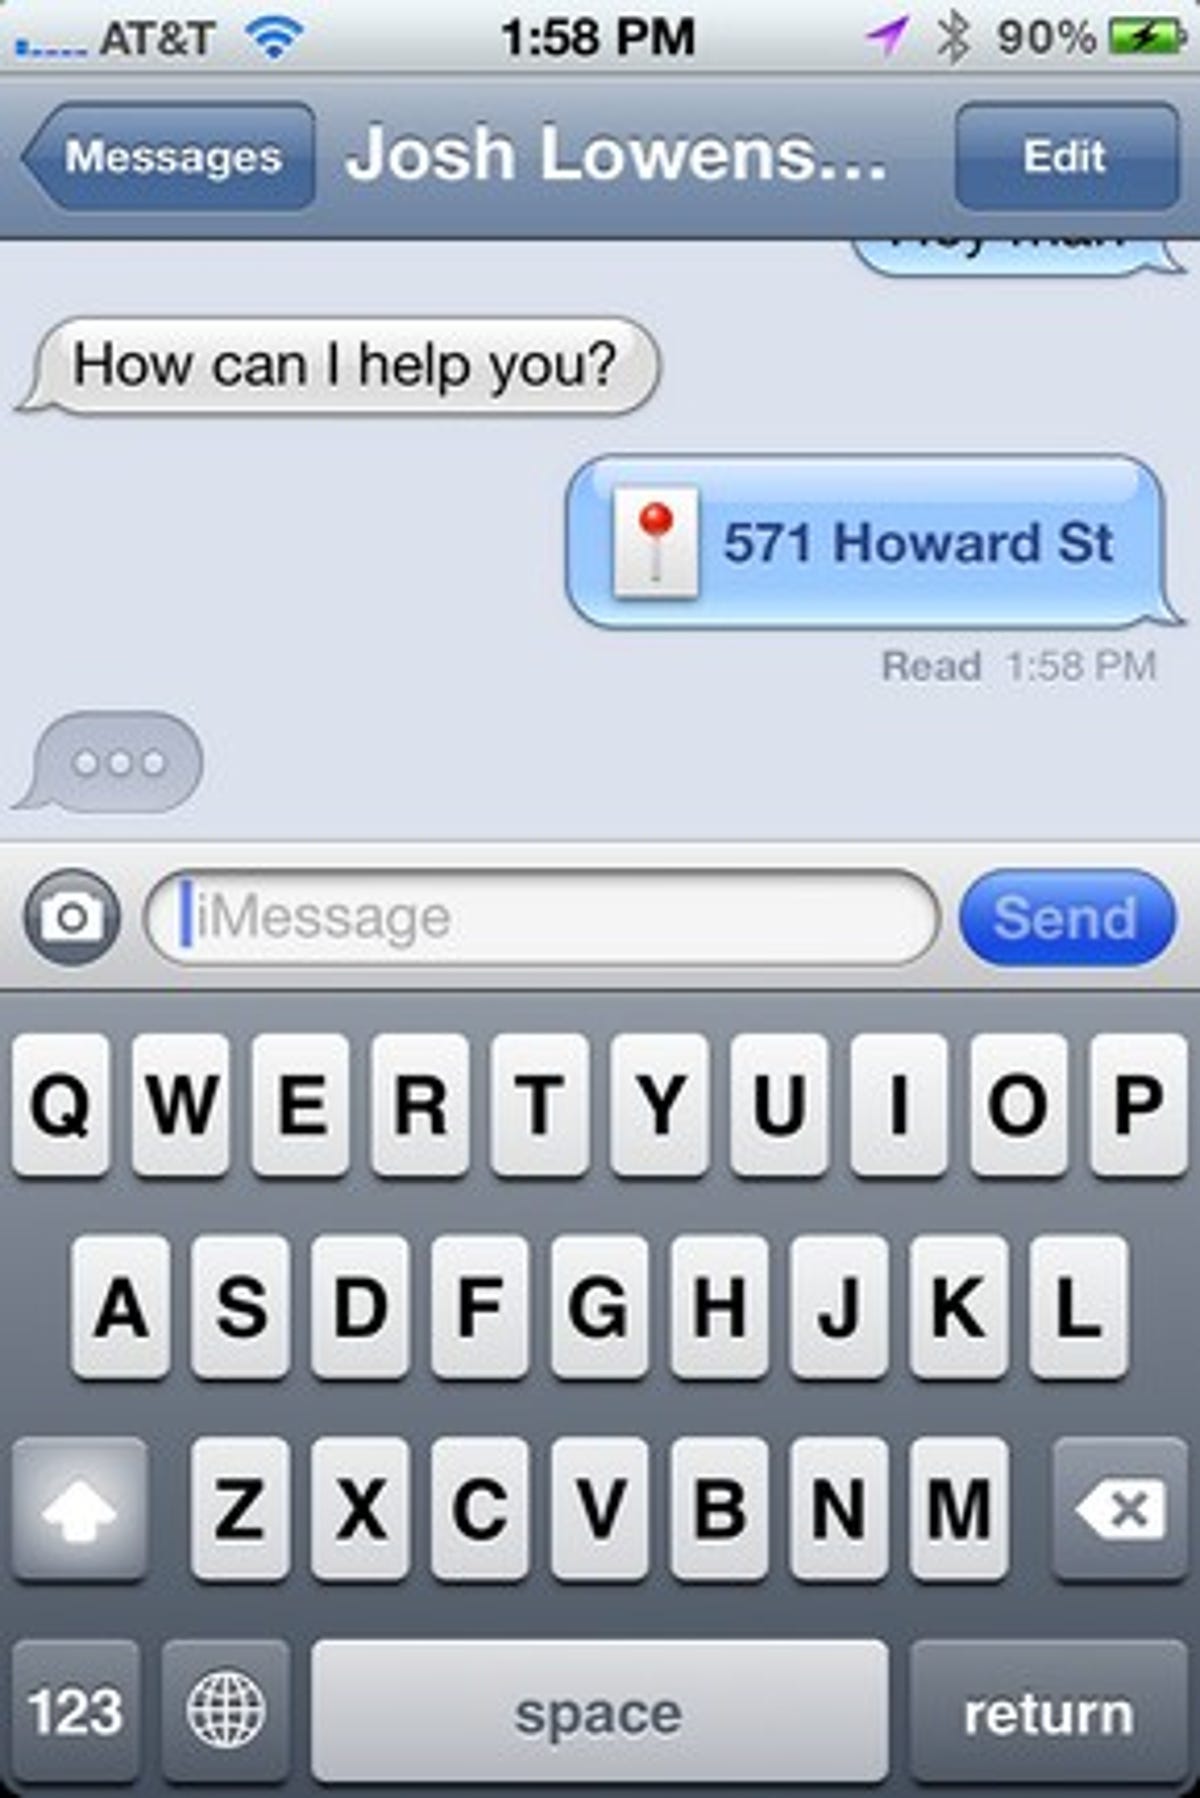 iMessage in action.